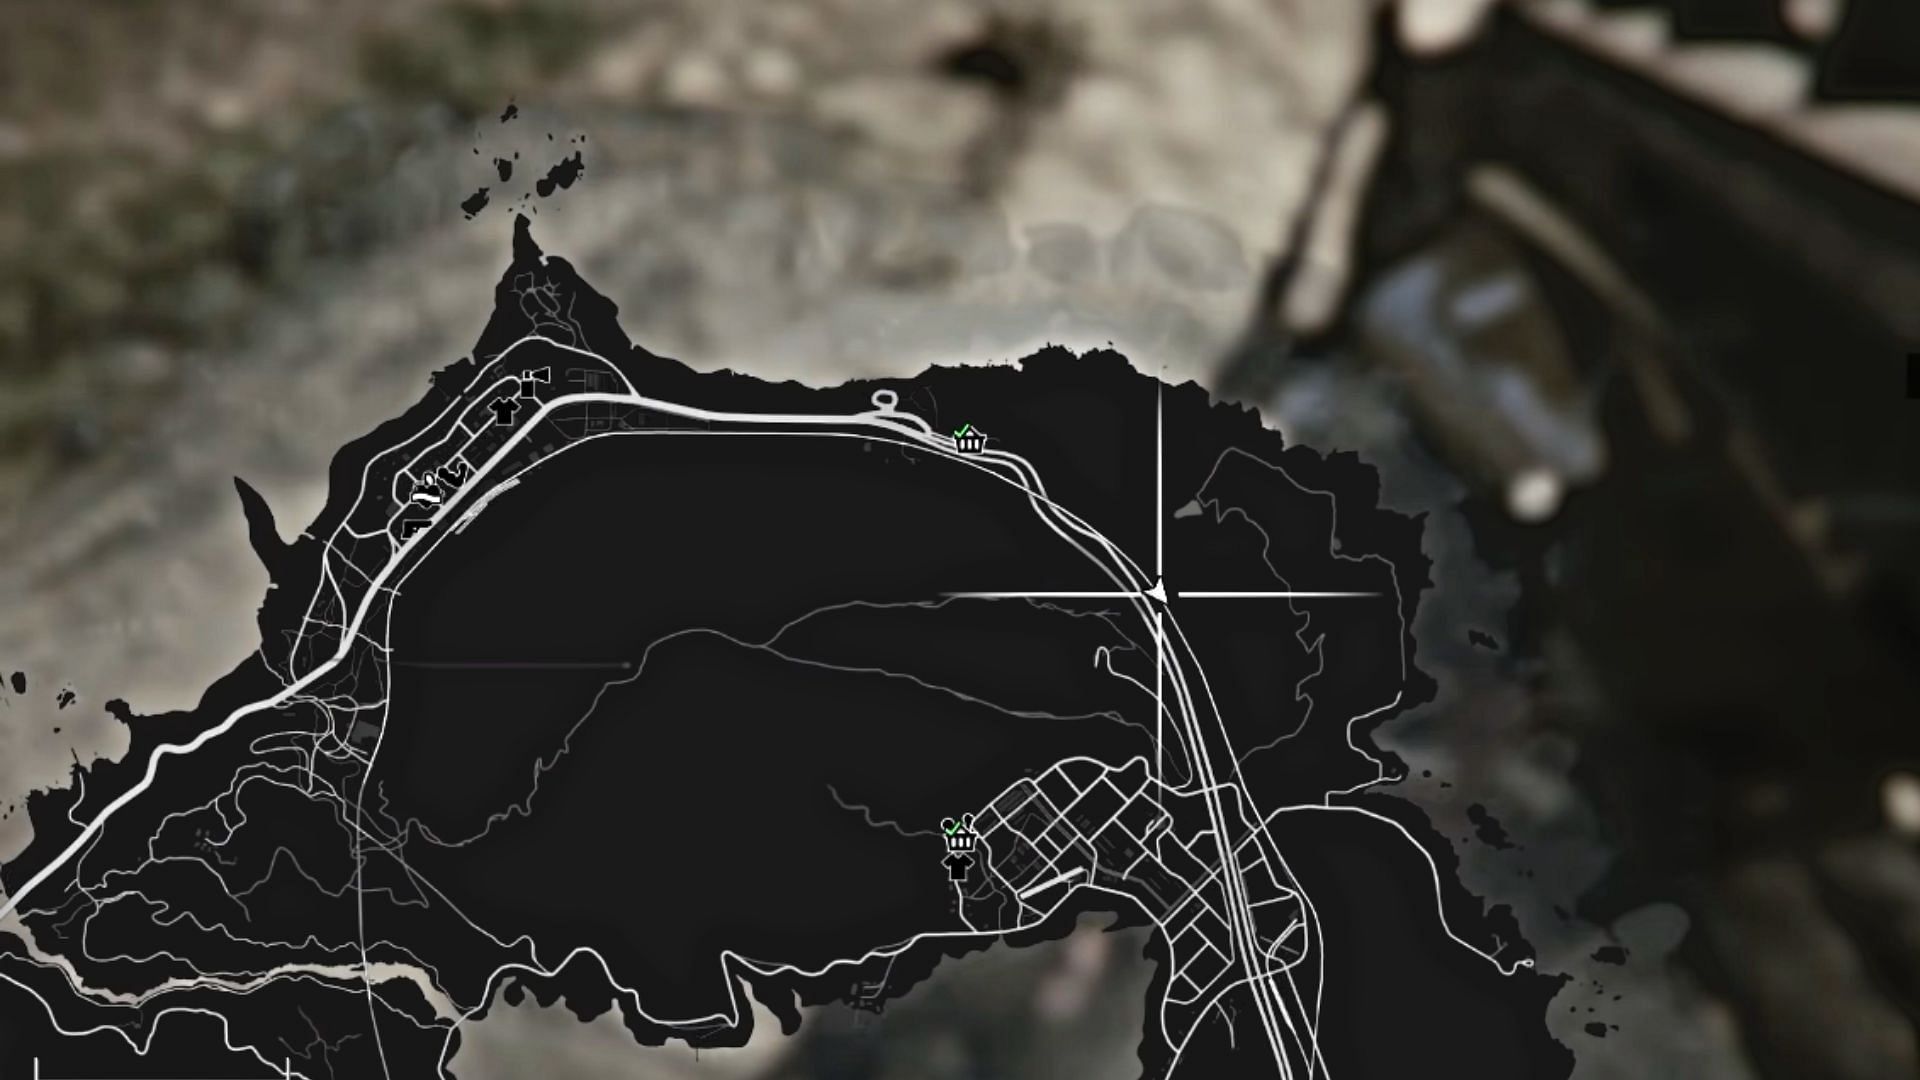 Possible location 1 (Image via Youtube @GTASeriesVideos)